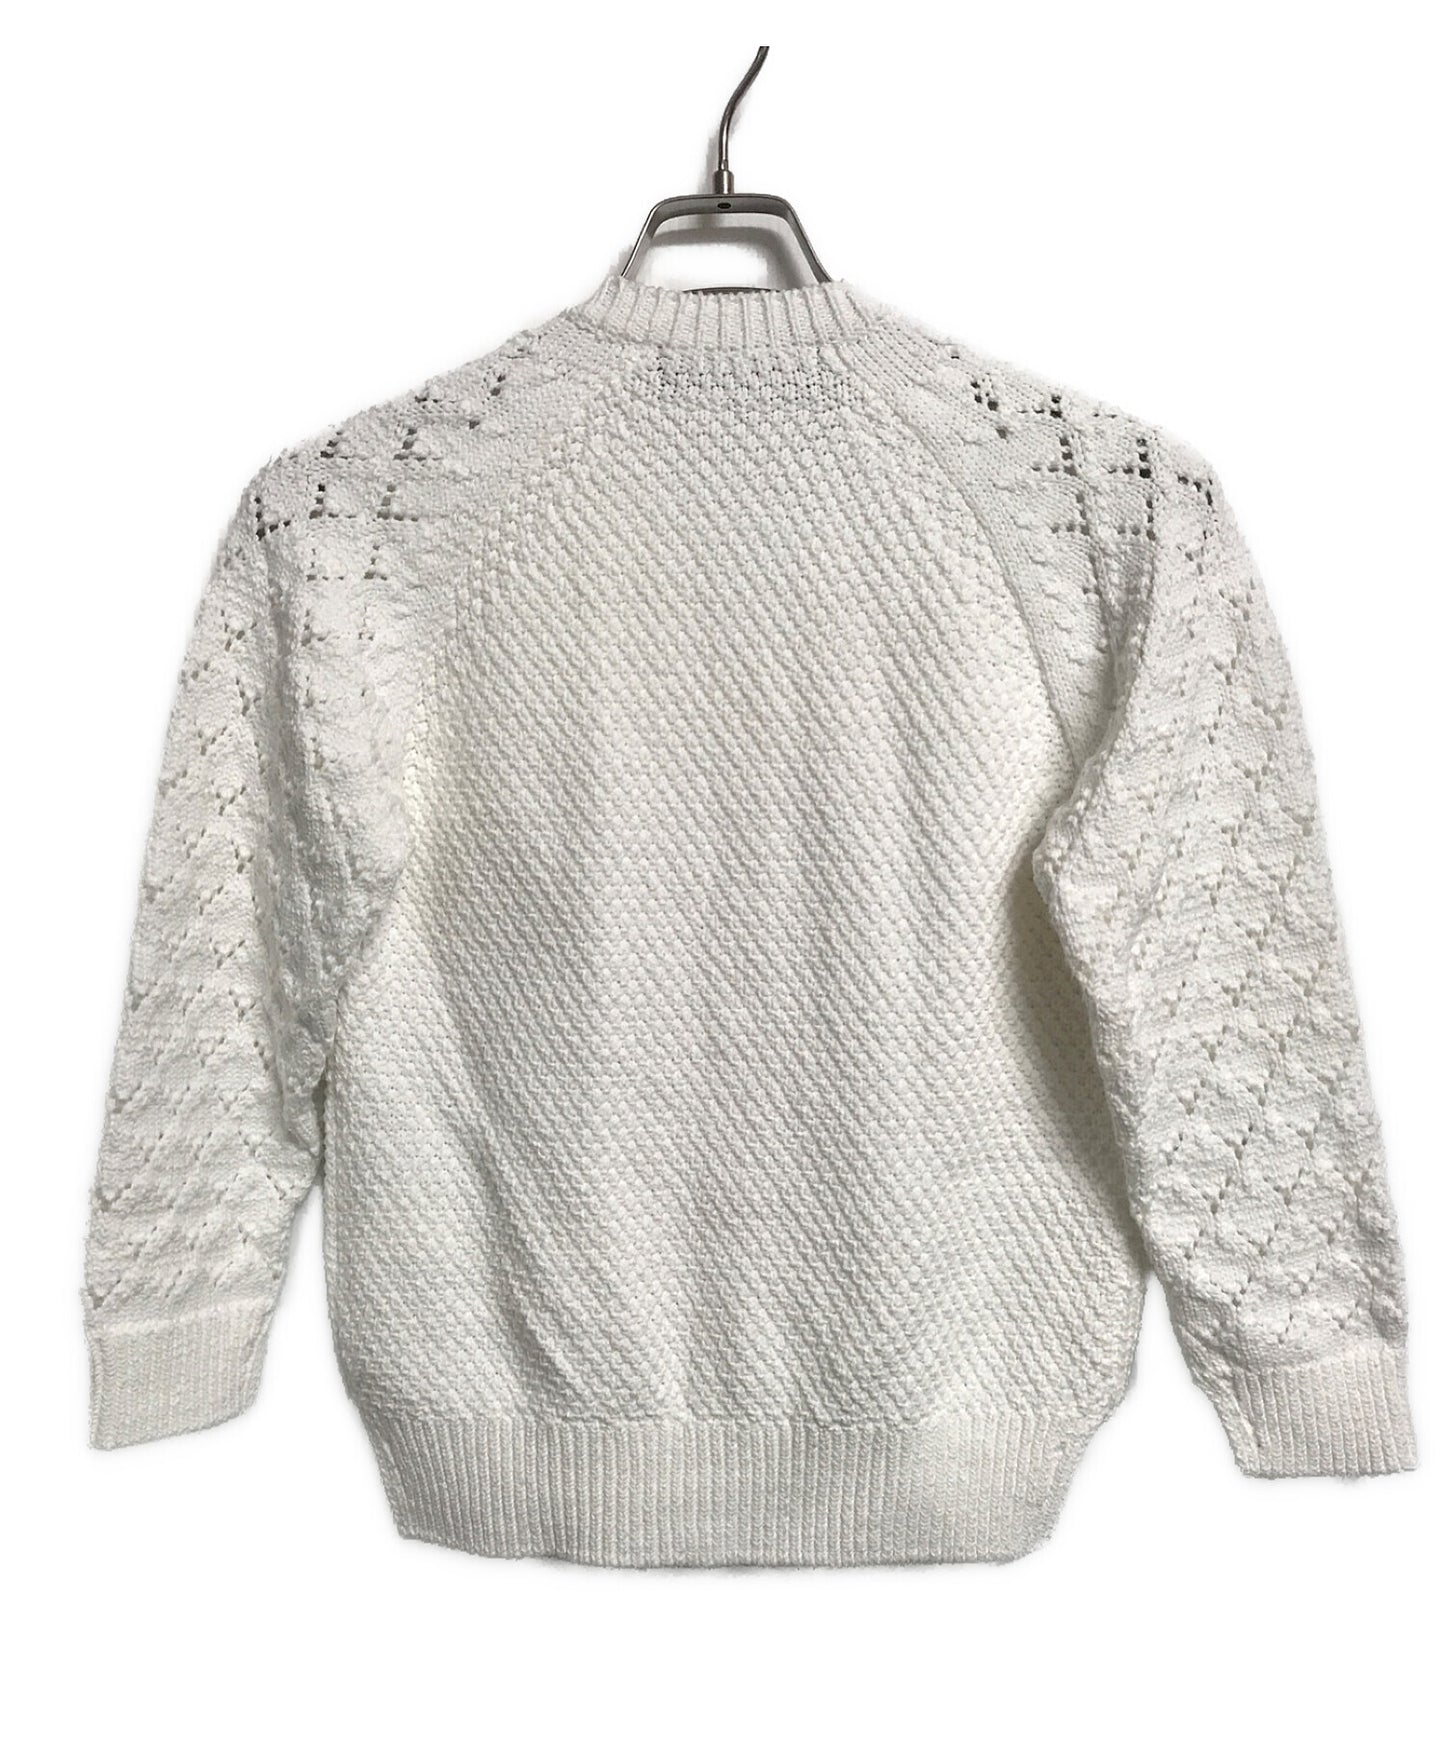 [Pre-owned] tricot COMME des GARCONS Cotton and Ester Aran Pattern Cardigan TG-N005-AD2020